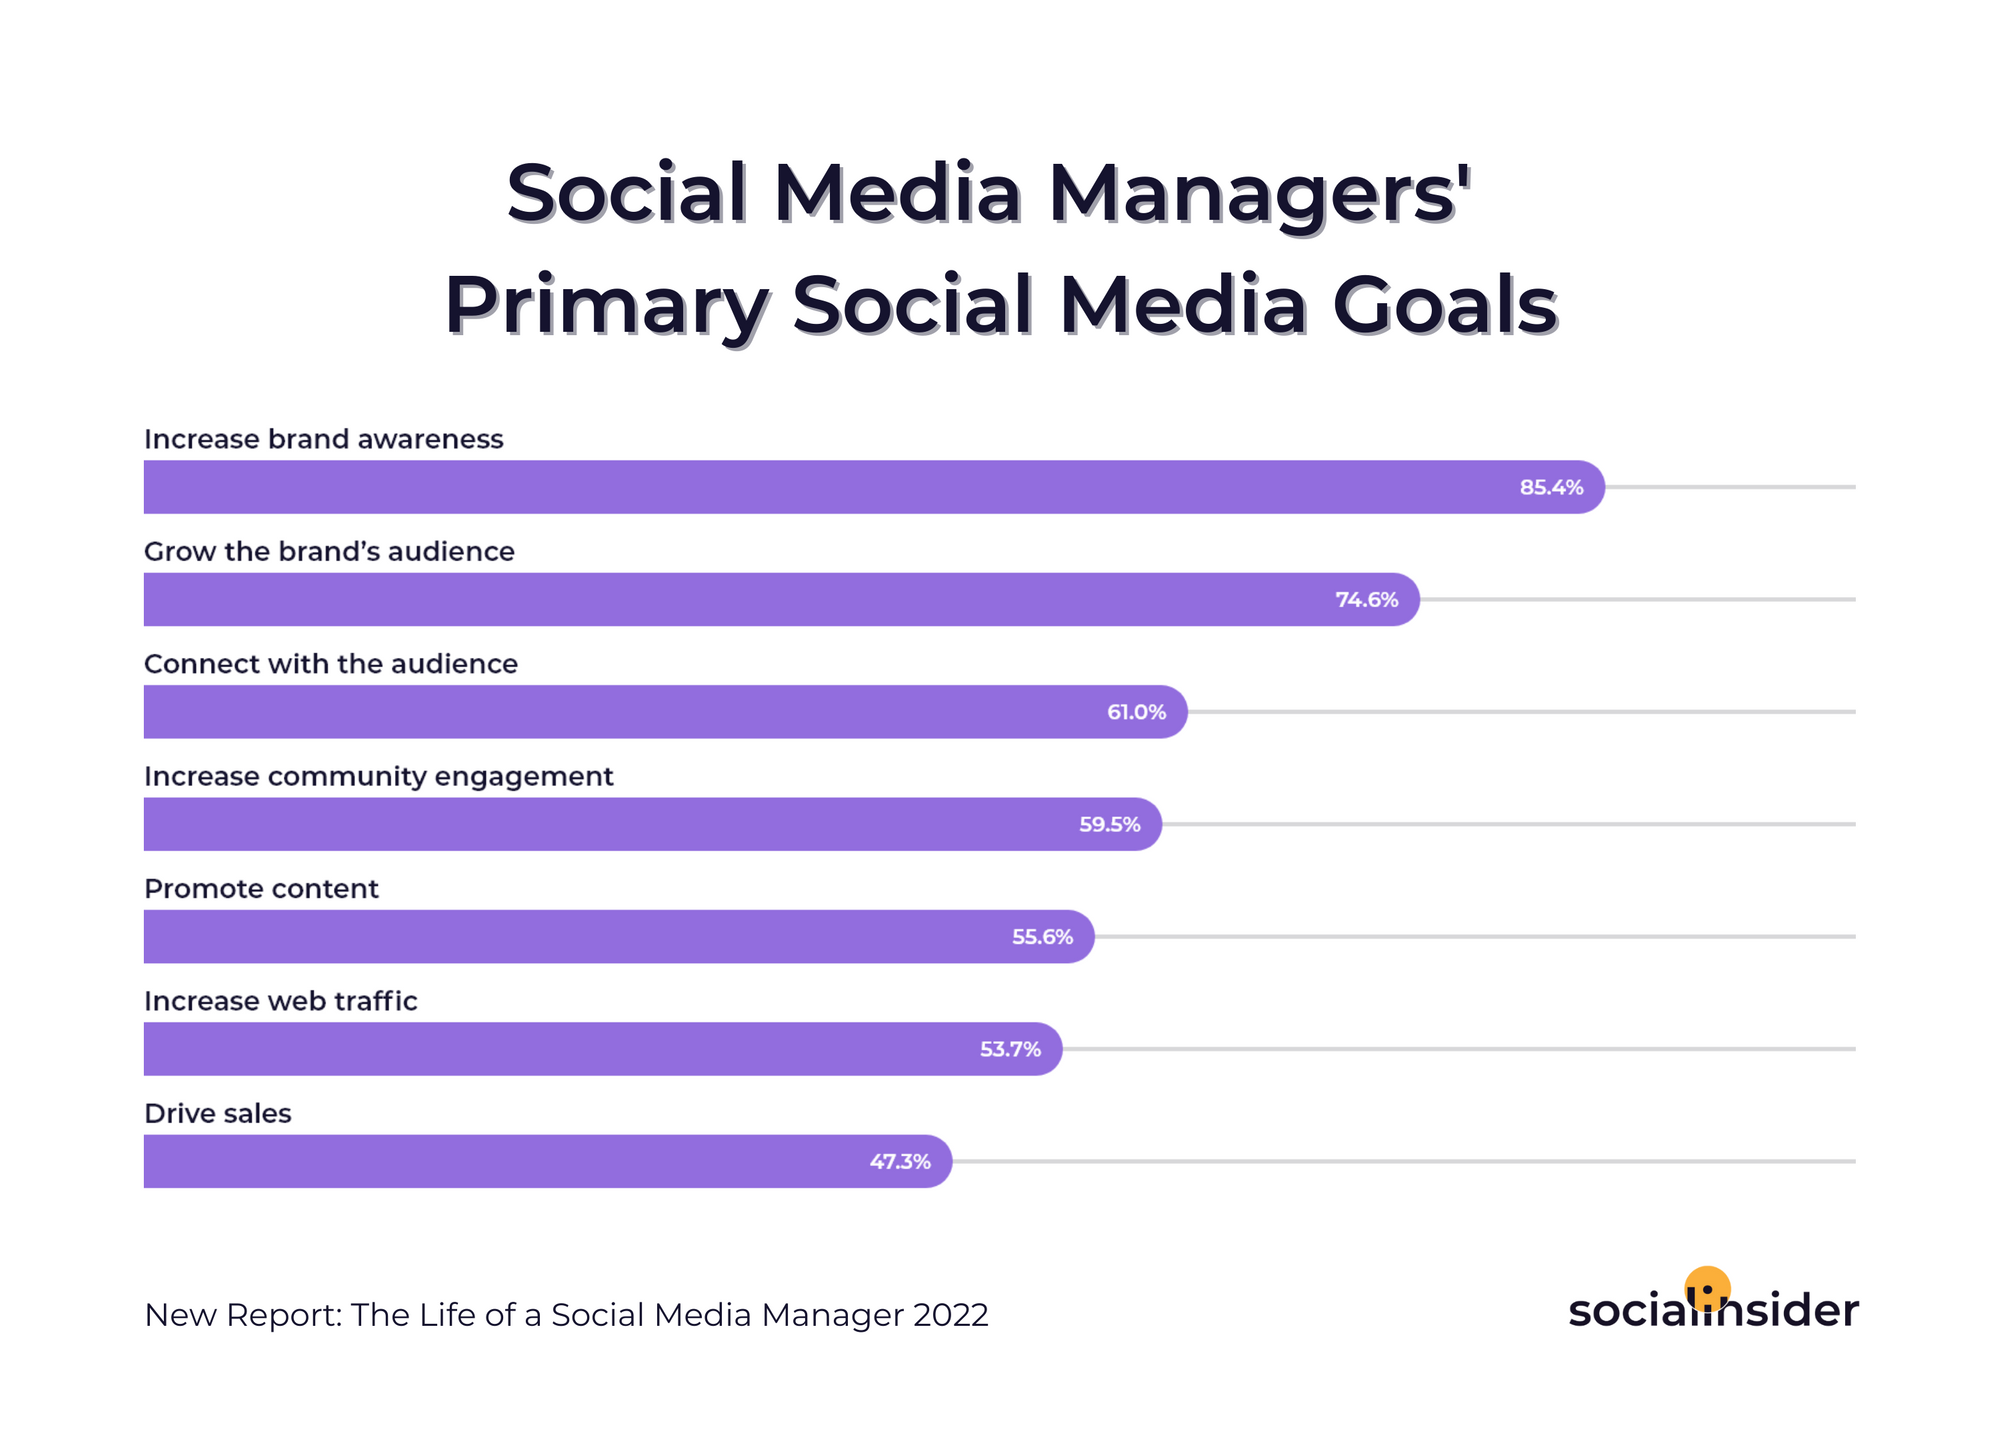 This is a graphic showing what are social media managers' primary goals.